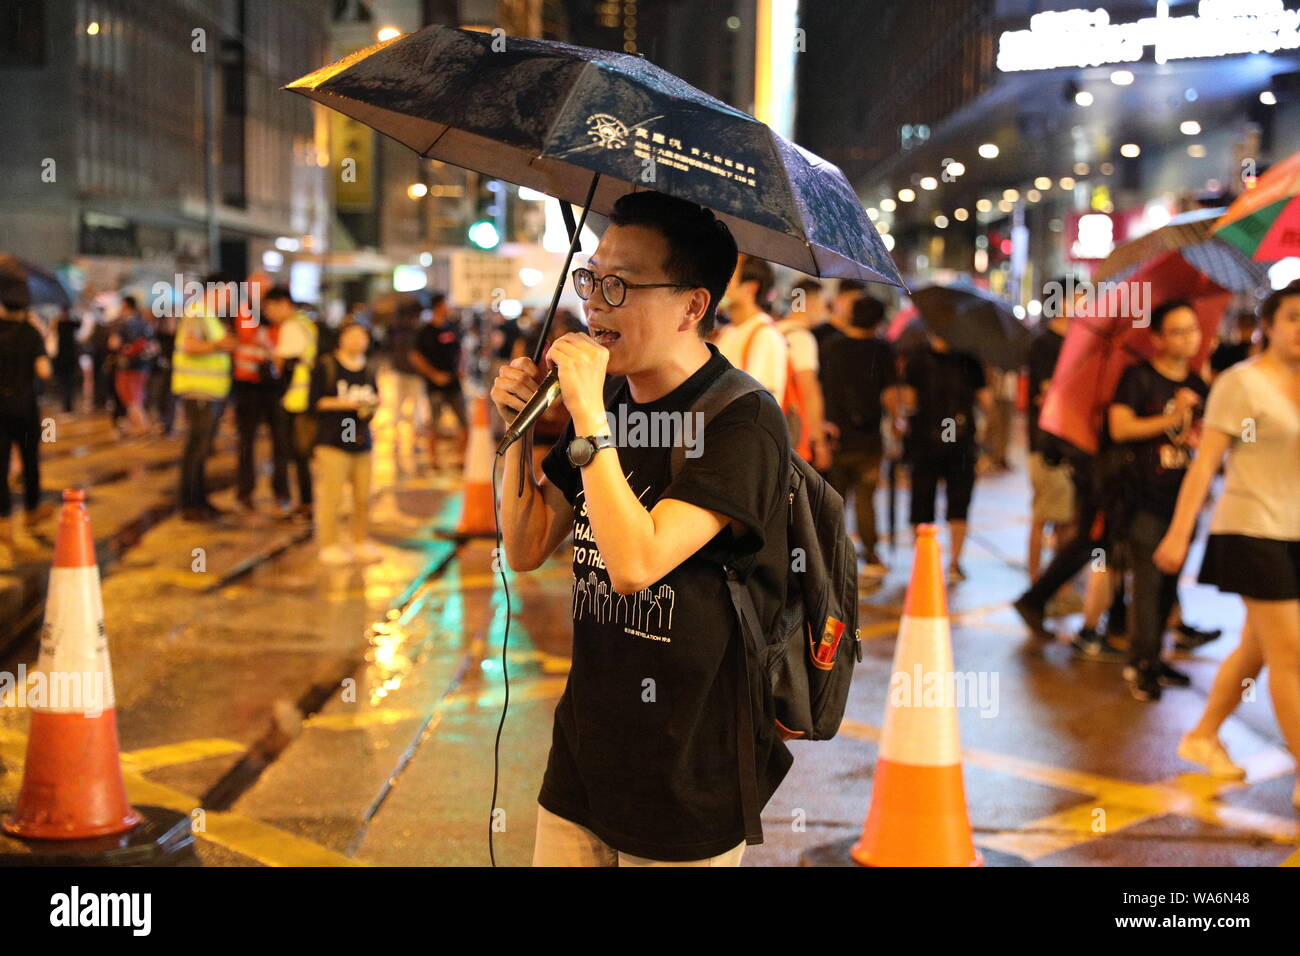 Hong Kong, China. 18 August 2019. Hong Kong Anti Extradition protest. Hundreds of thousands of protesters march through Hong Kong Island. One of the organizers asks protesters to avoid going to China Liaison Office in an attempt to avoid clashes with police Credit: David Coulson/Alamy Live News Stock Photo